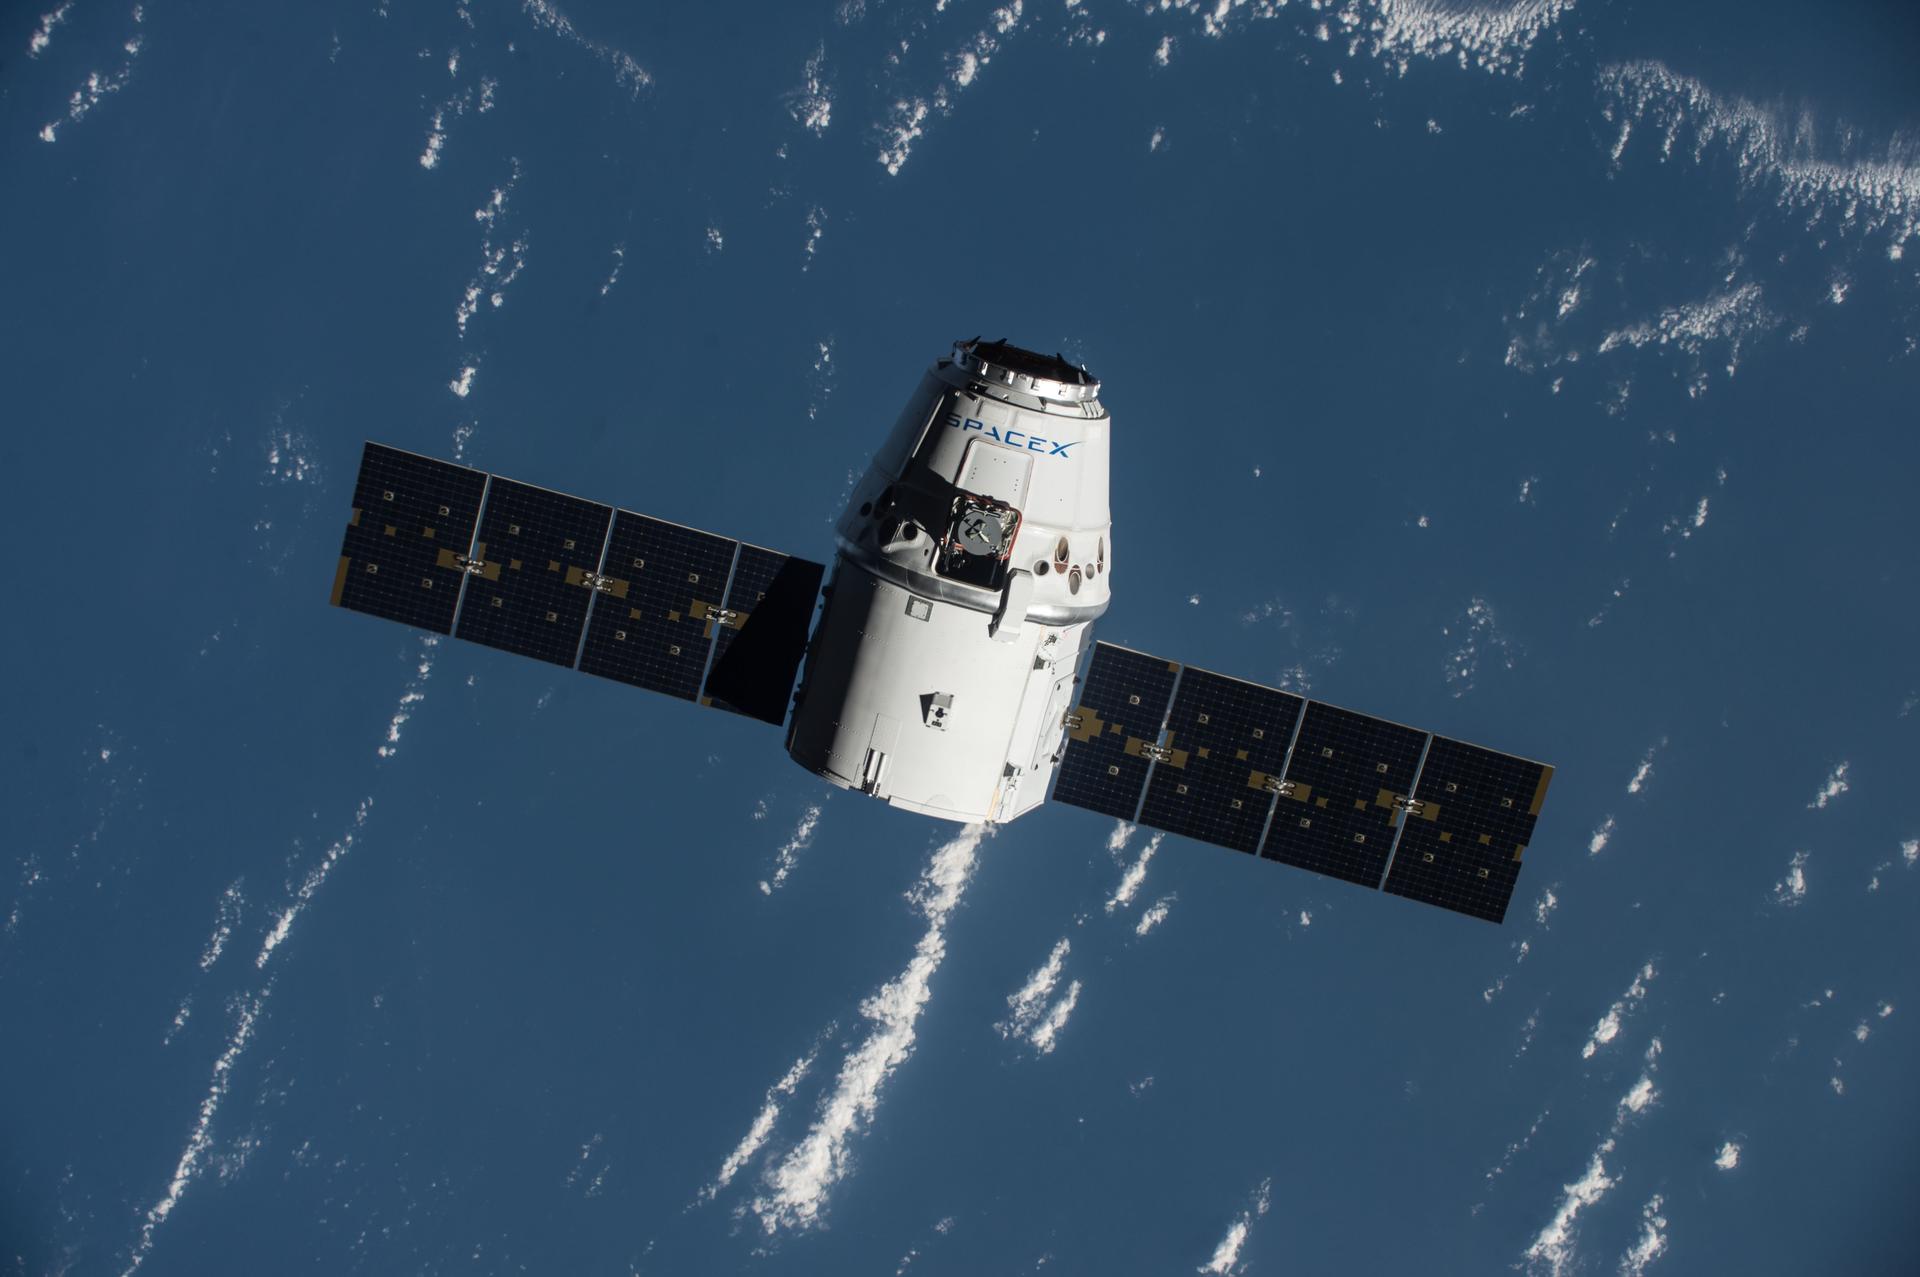 A SpaceX Dragon spacecraft approaches the International Space Station on 20 July, 2016